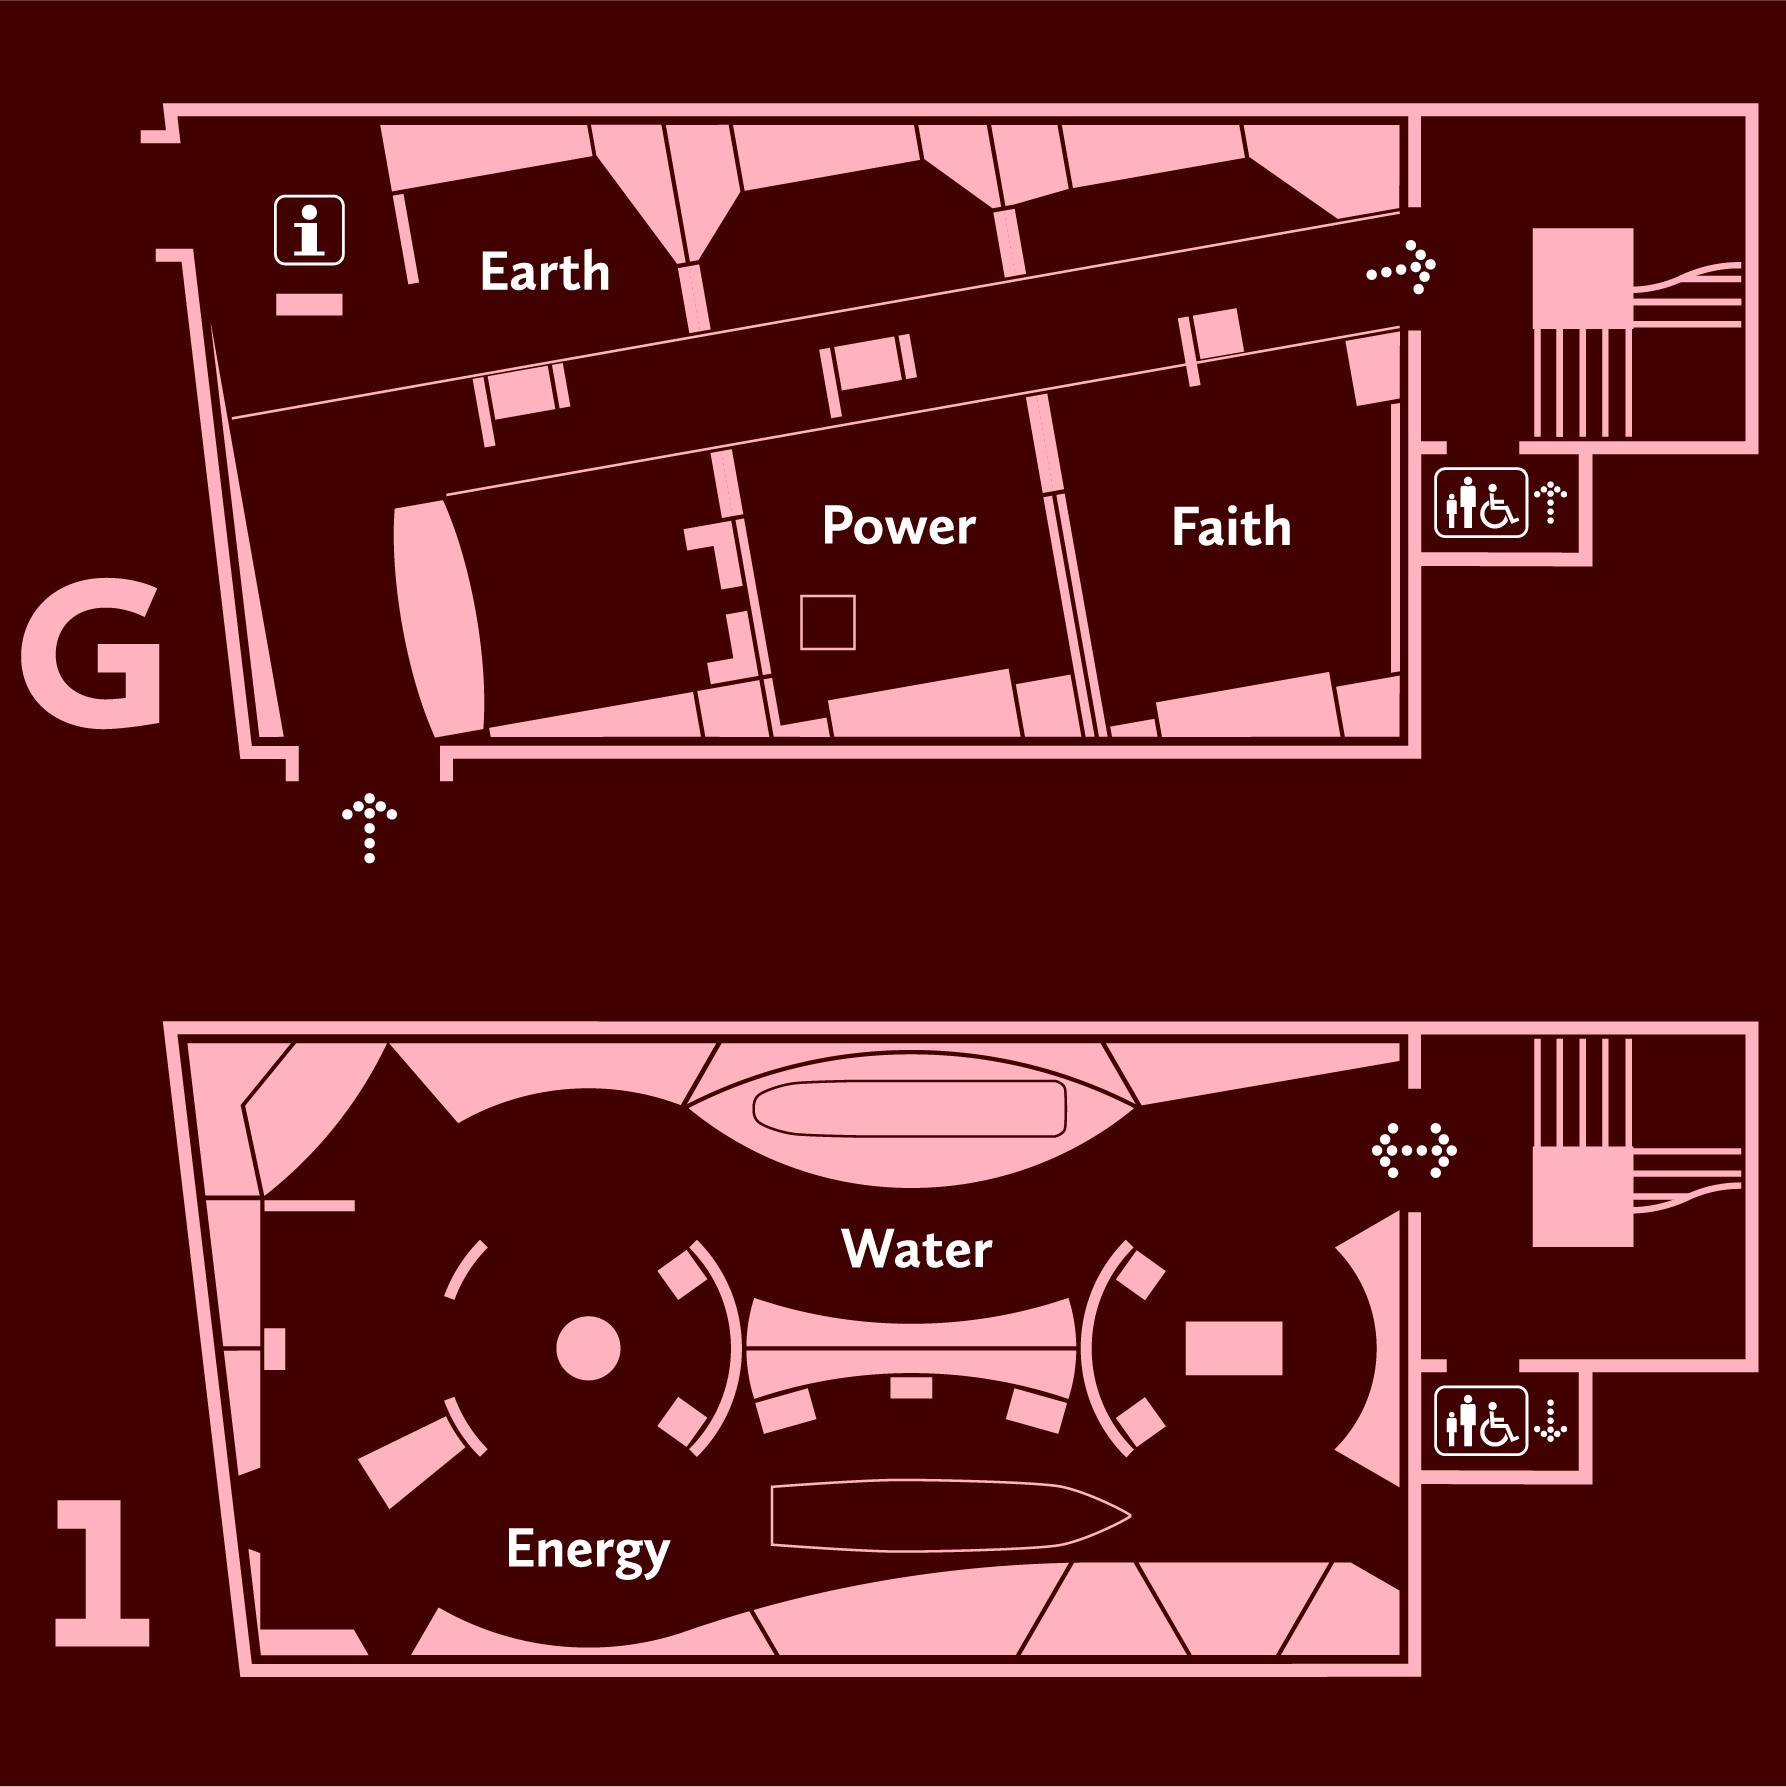 Diagram showing floorplans of the Museum's ground- and first-floor exhibition spaces